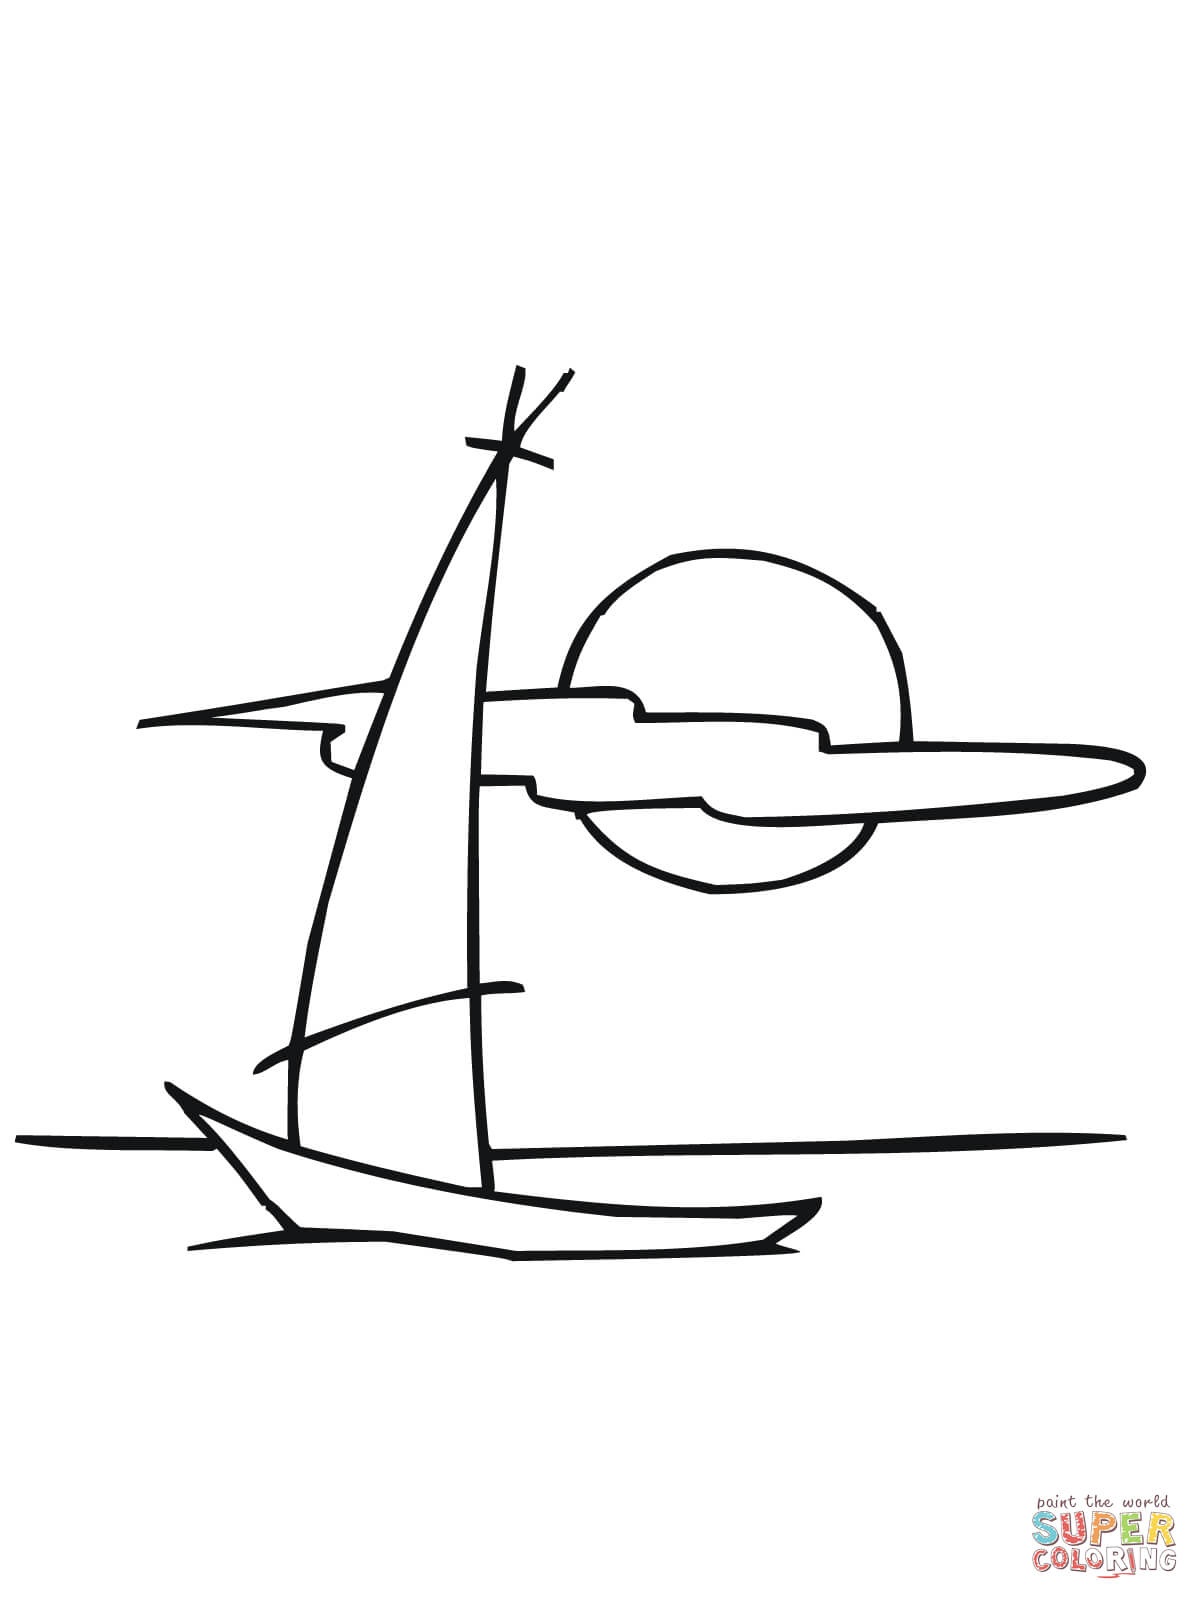 Sailing Dinghy Boat Coloring Page | Free Printable Coloring Pages - Free Printable Sailboat Template